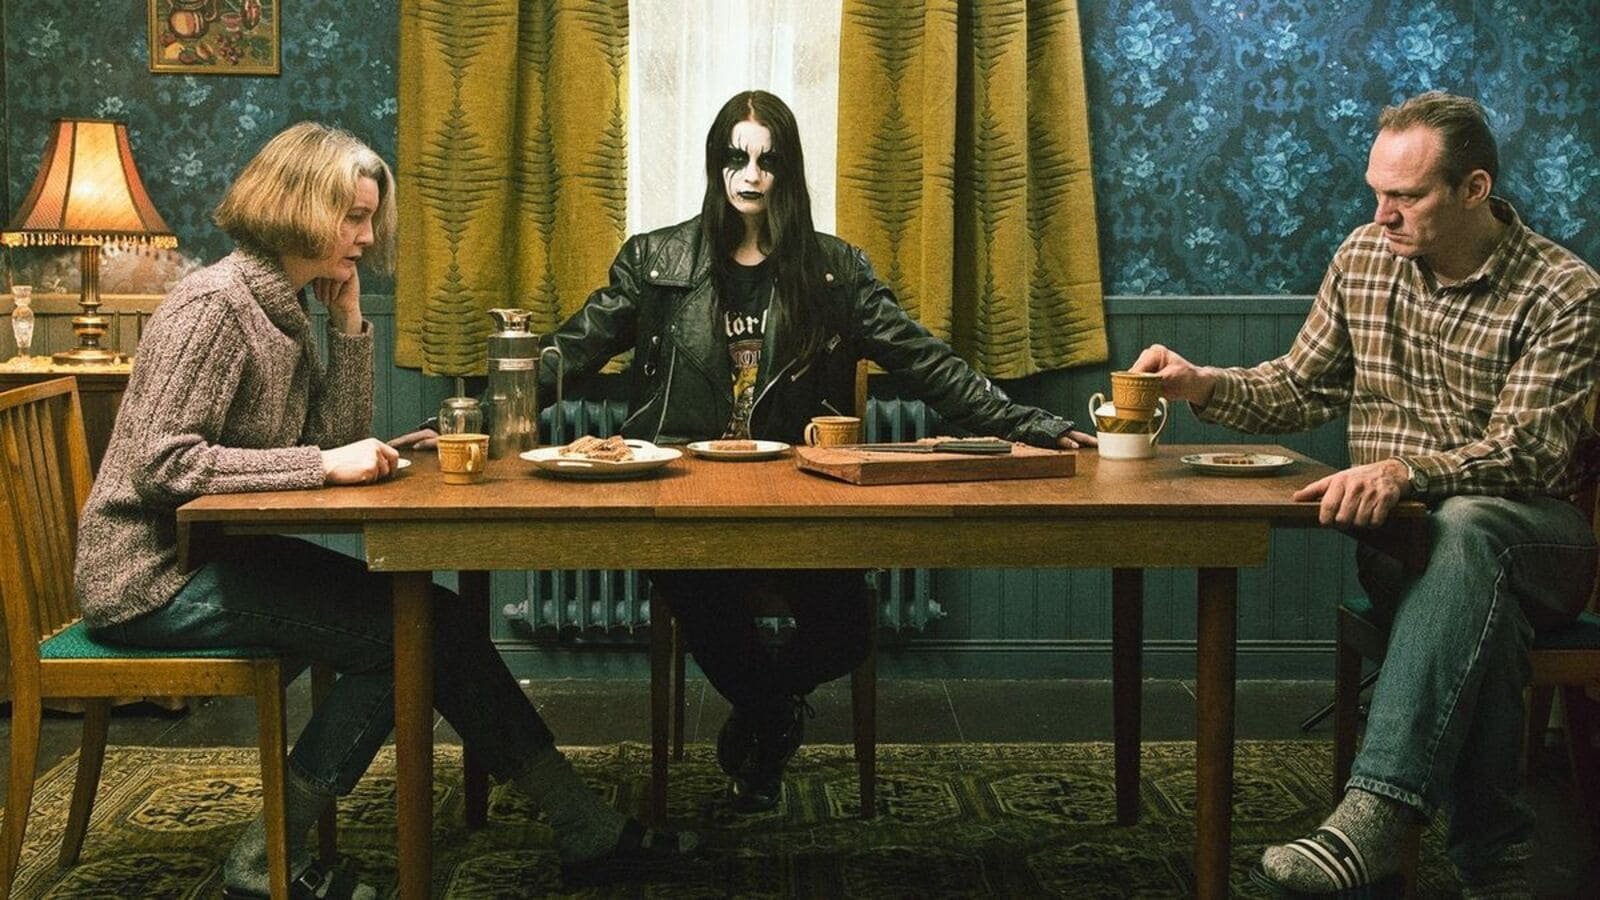 The Top 12 Best Heavy Metal Movies of All Time